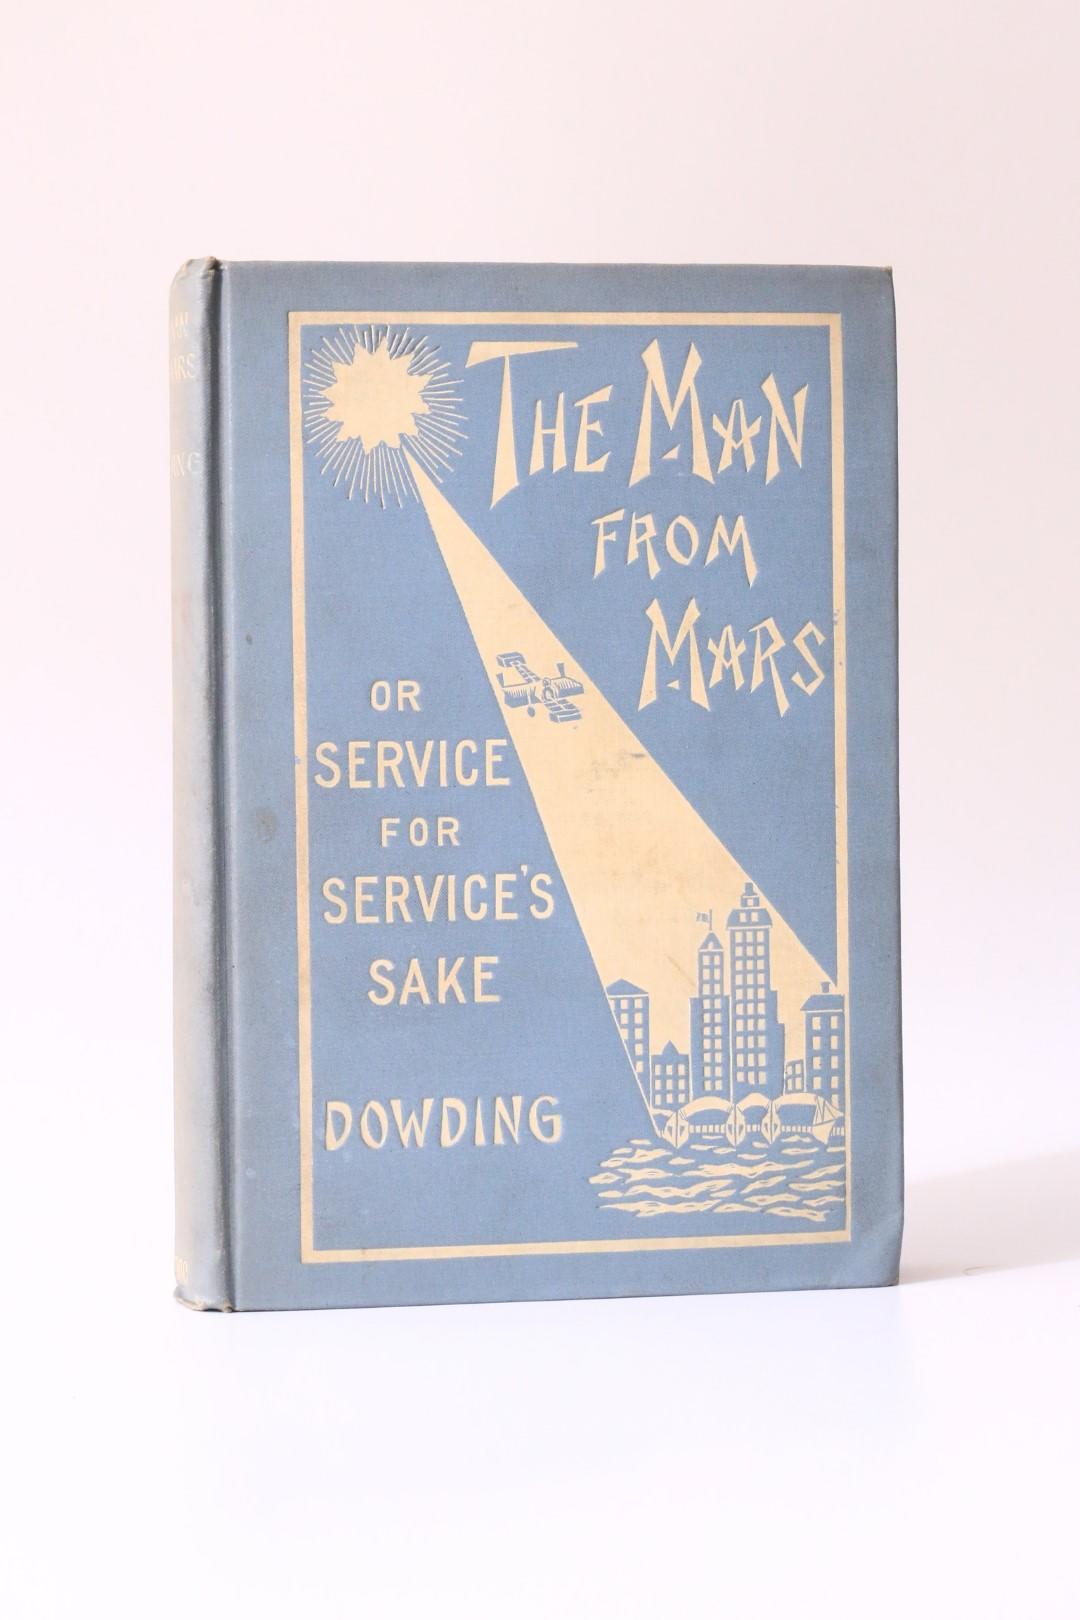 Henry Wallace Dowding - The Man from Mars or Service for Service's Sake - Cochrane Publishing Company, 1910, First Edition.